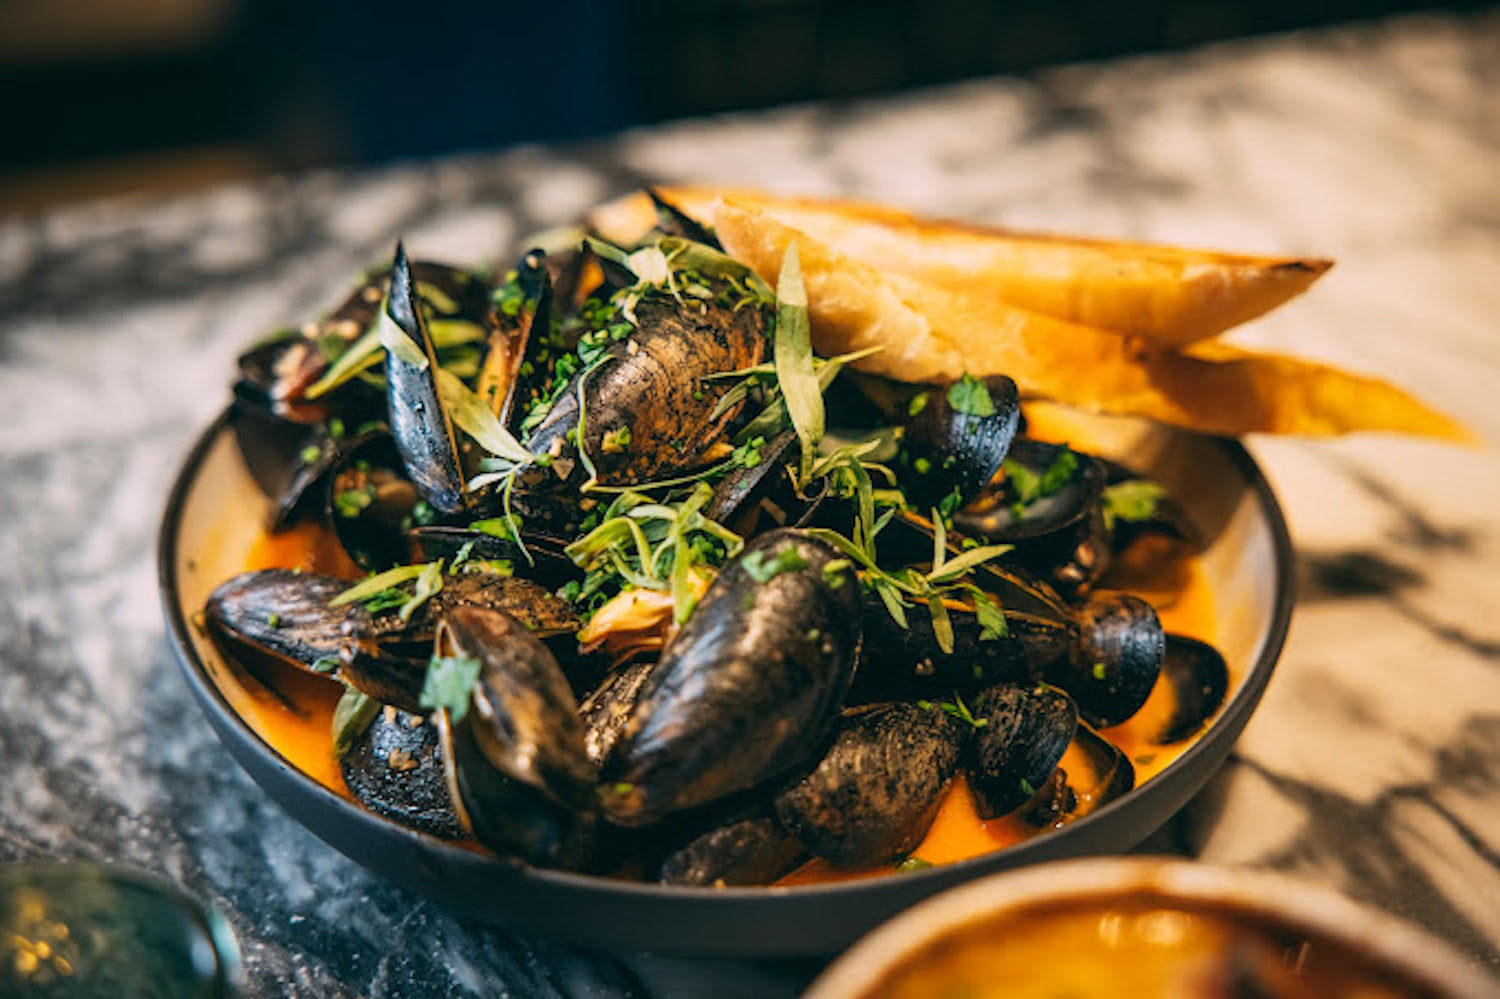 Mussels in a dish with bread slices